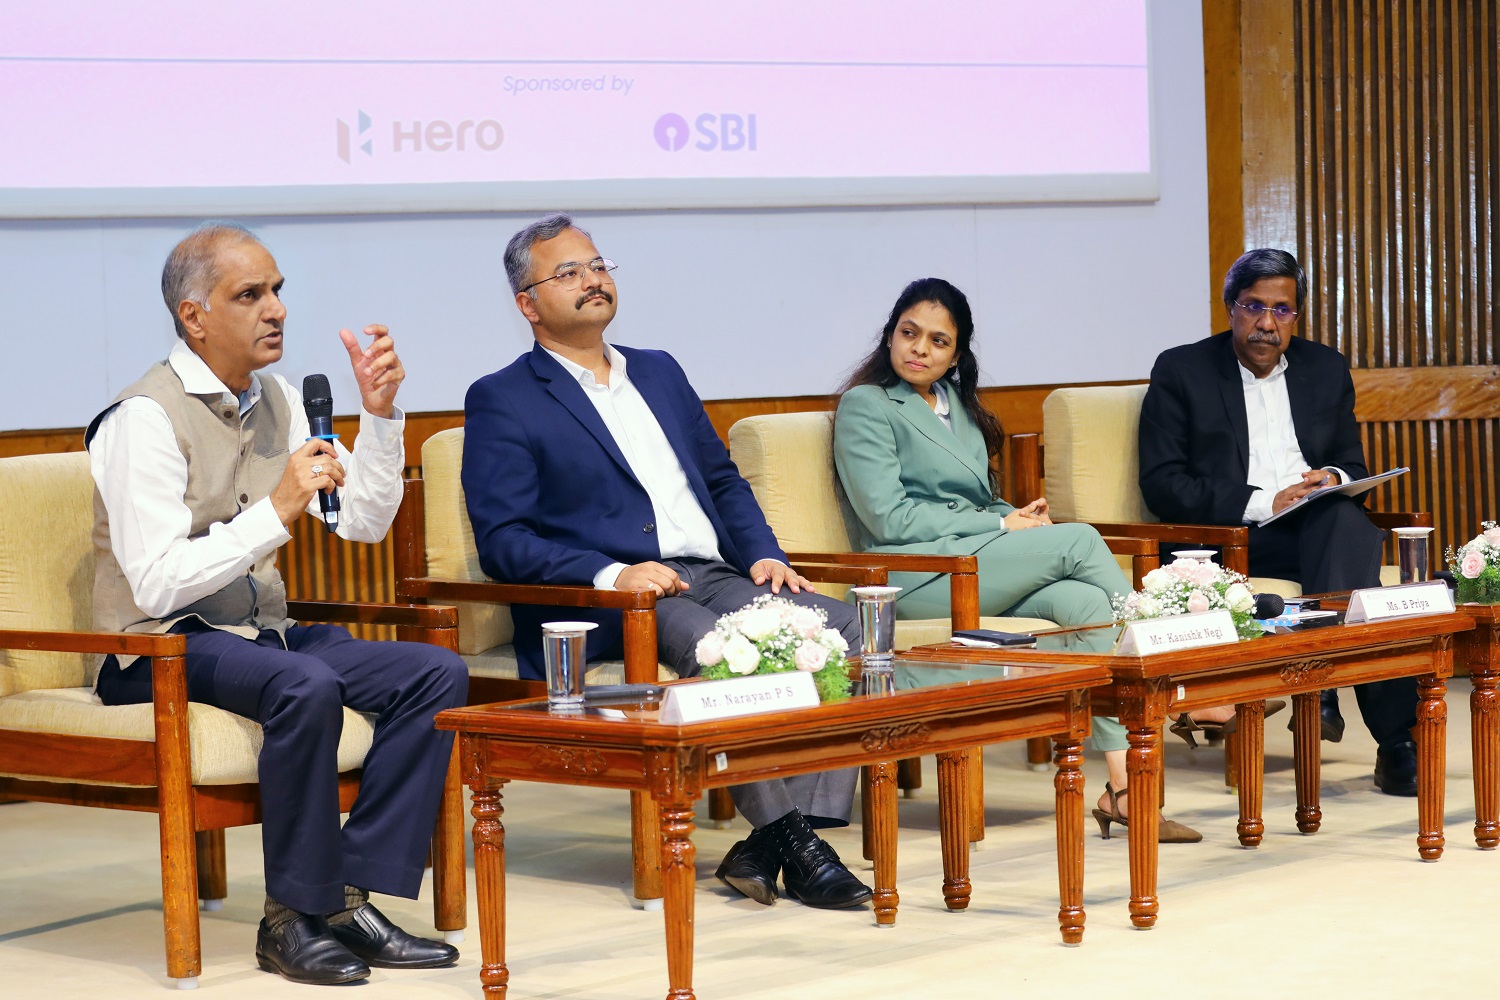 Prof. P D Jose, Faculty from the Strategy area, moderated the panel discussion on "Sustainable Strategies: Accelerating Green Transformation". (L-R) Narayan P S, Global Head- Sustainability and Social Initiatives, Wipro Ltd.; Kanishk Negi, Sustainable Procurement Director, Schneider Electric; Priya B, Director, EY and Prof. P D Jose.